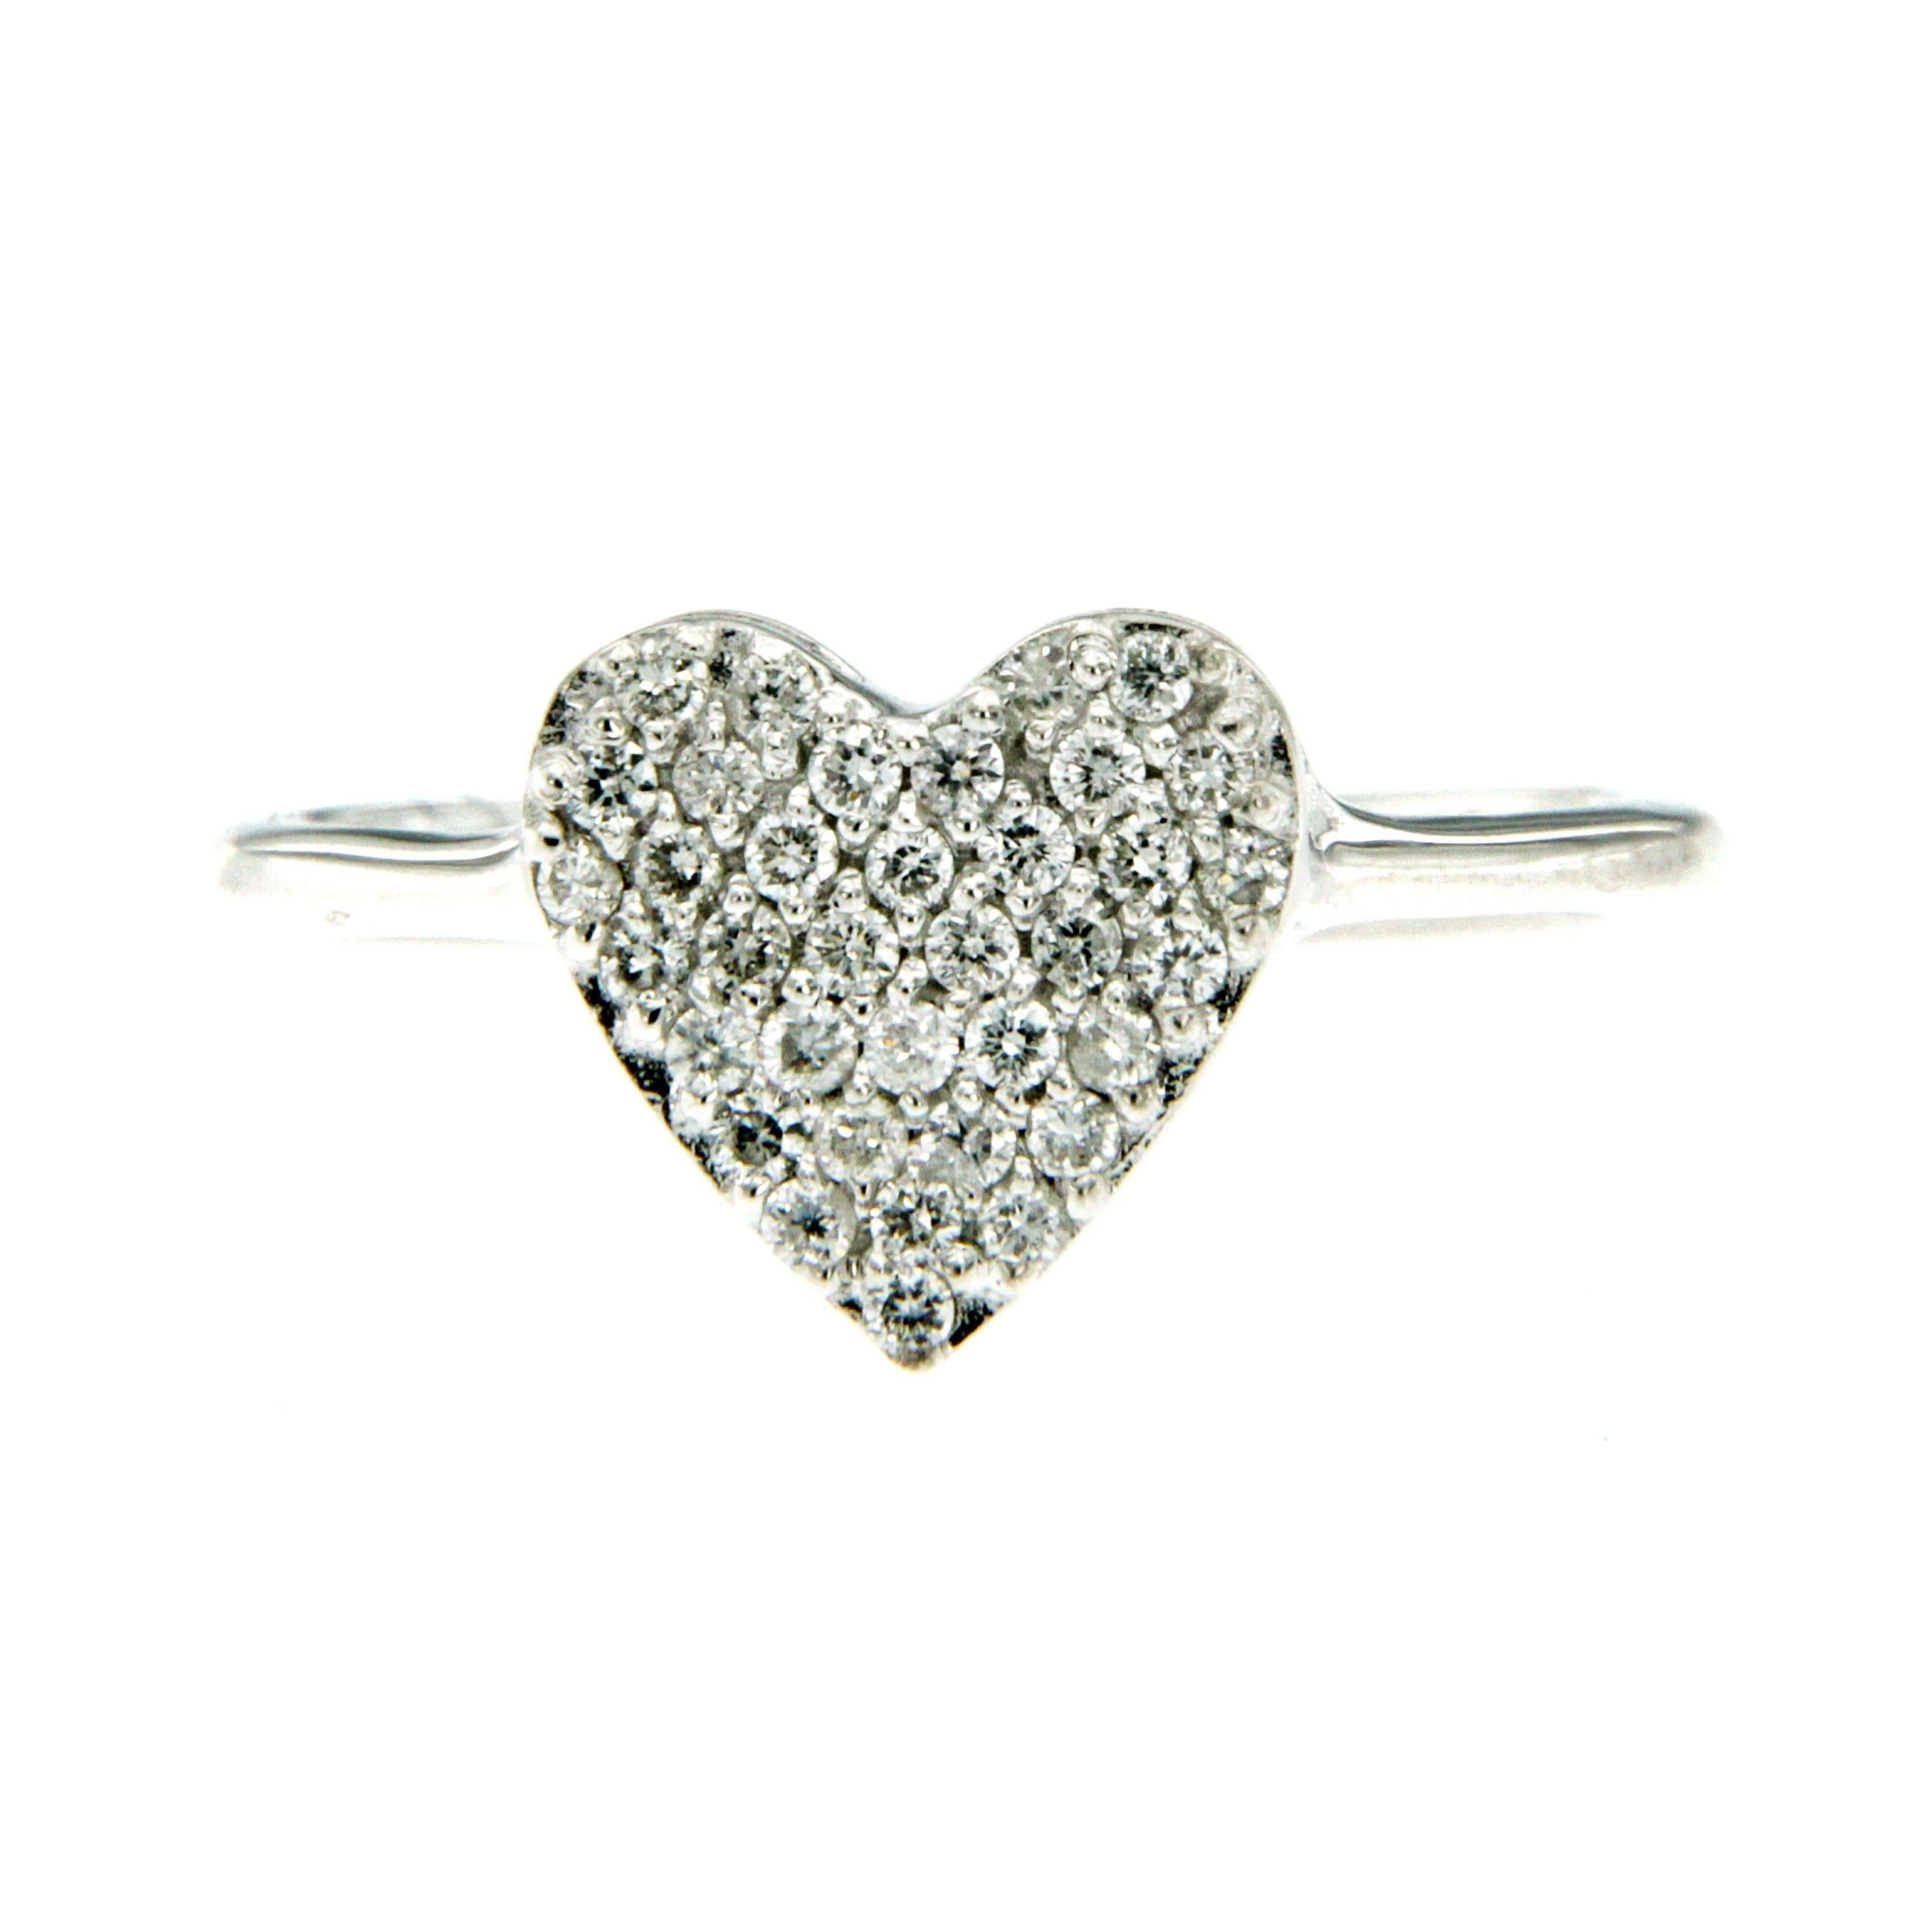 This 18k white gold heart ring is entirely handcrafted and embellished with 0.25-carats of sparkling diamonds.
Wear yours alone or stacked with similar styles.

CONDITION: Brand New
METAL: 18k white Gold
GEM STONE: Diamonds 0.20 total carats 
DESIGN